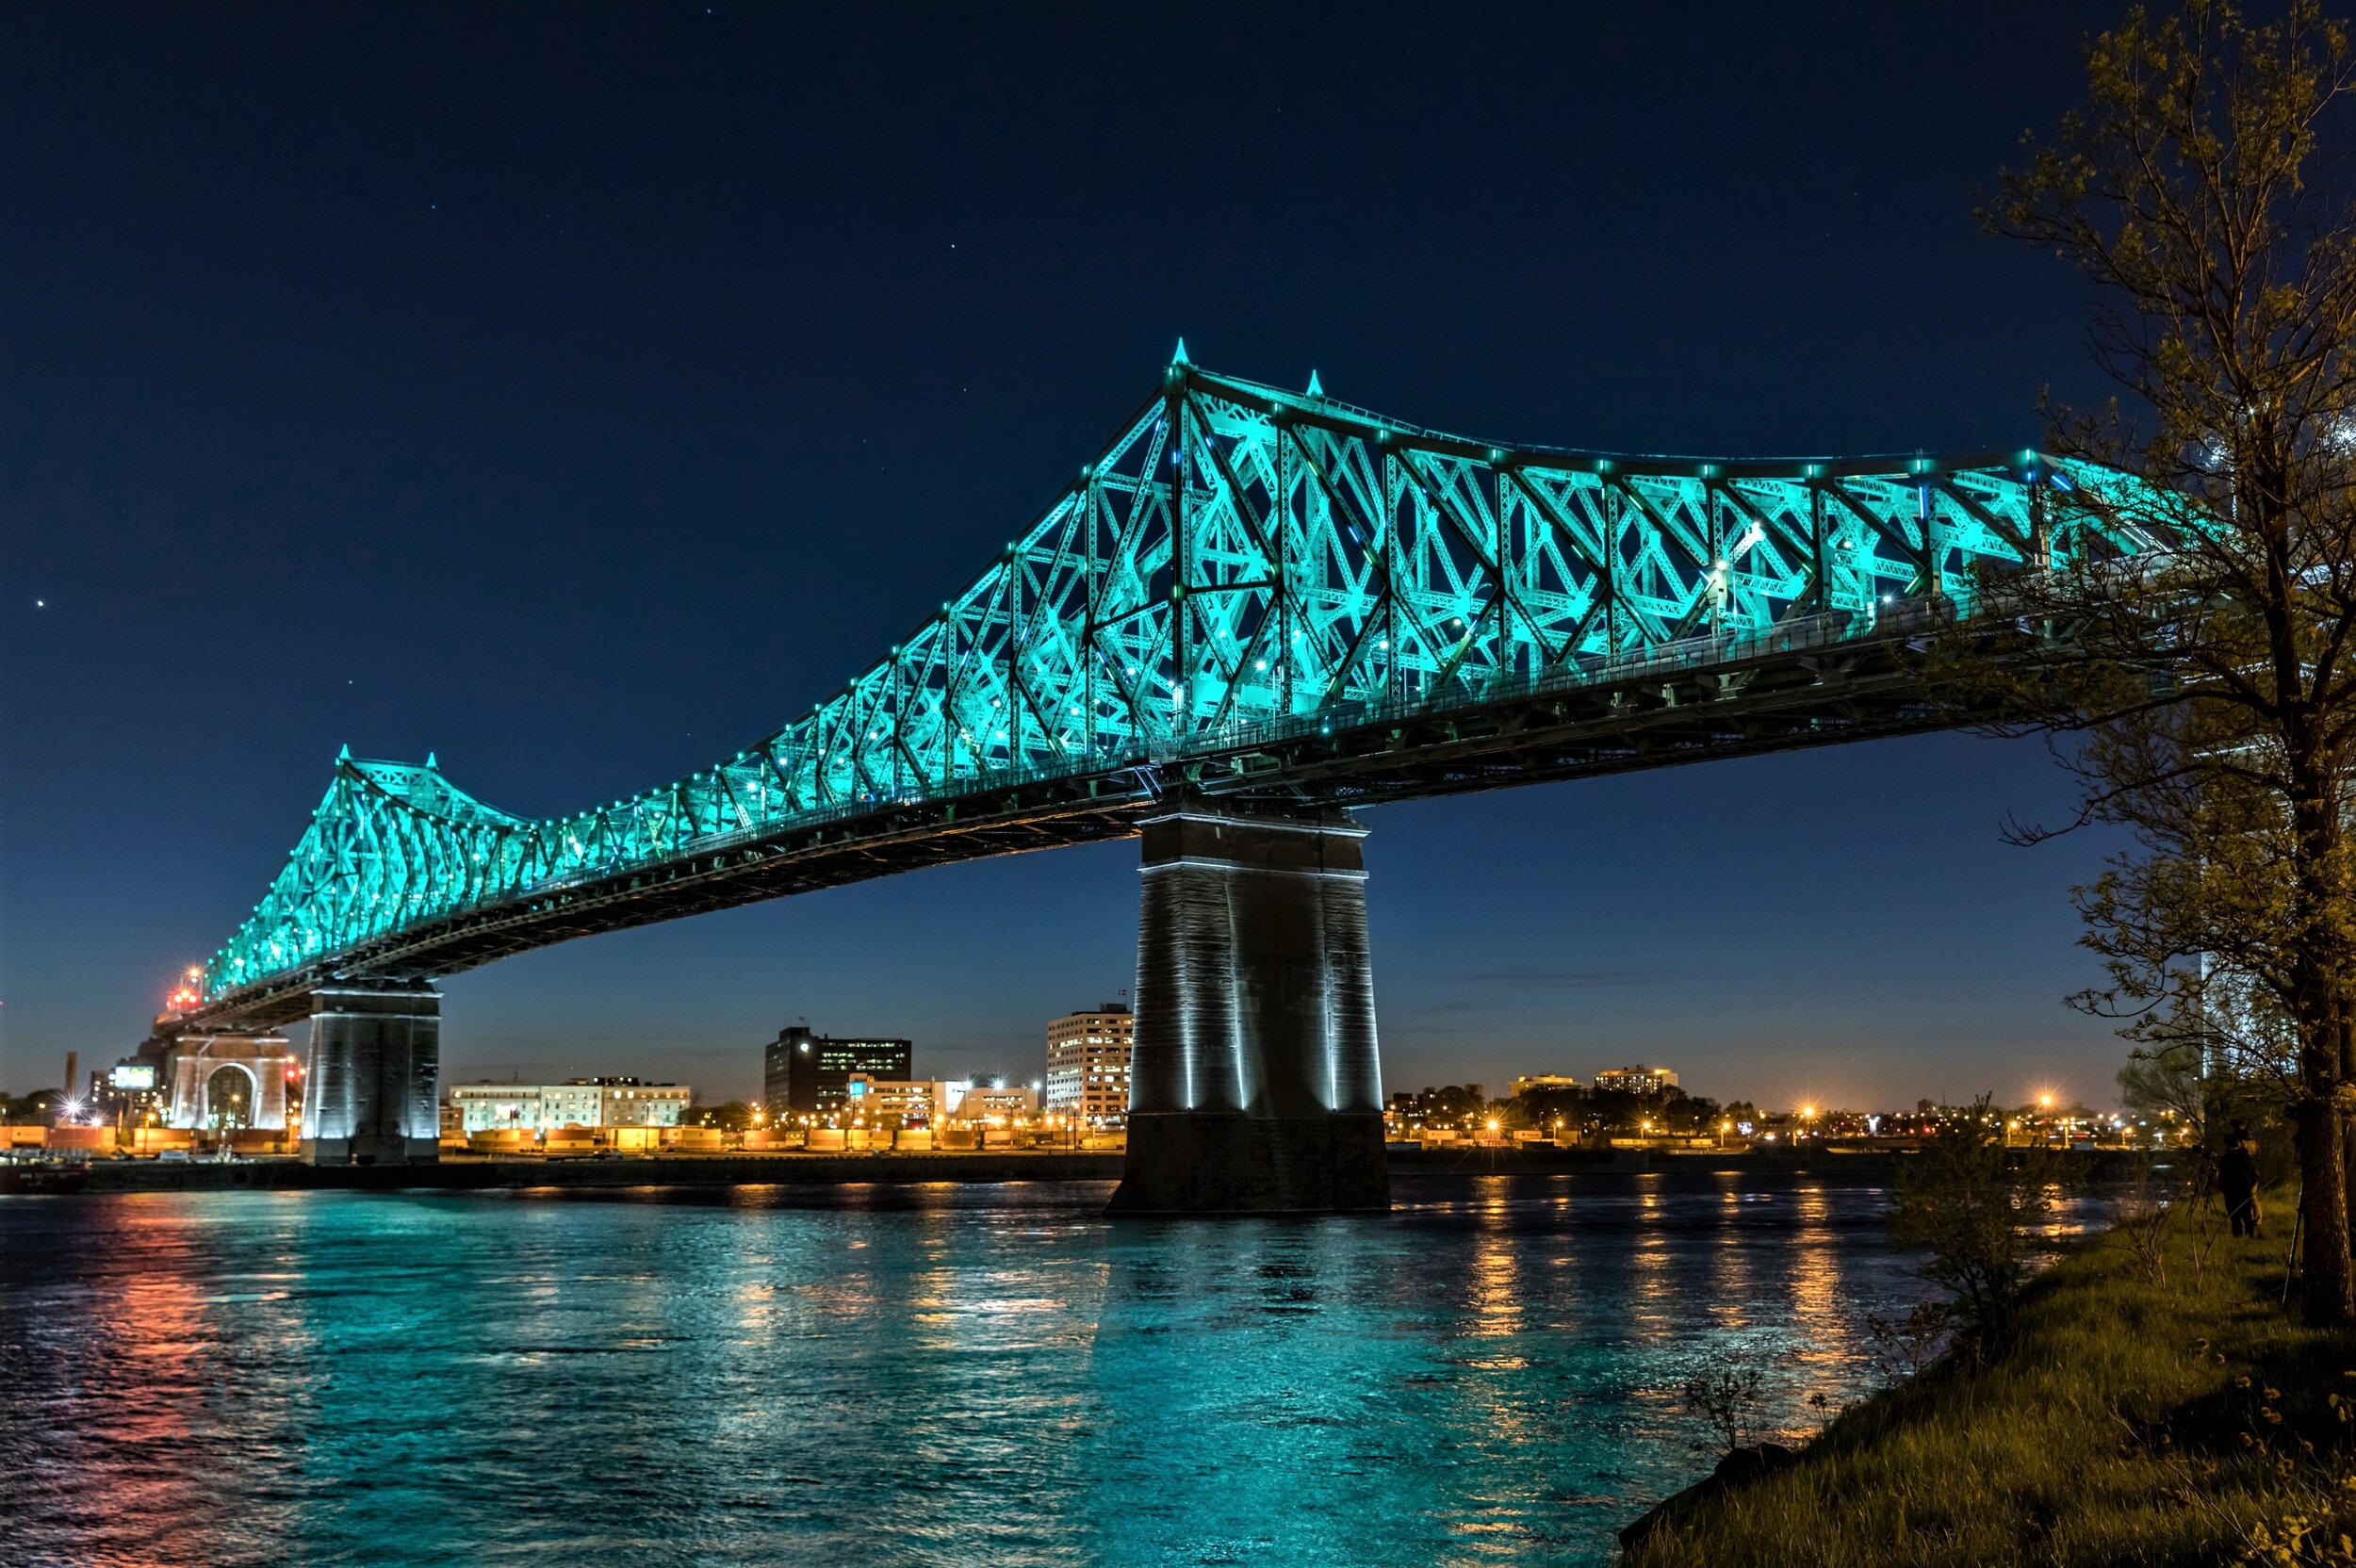 The Jacques Cartier Bridge in Montreal, Quebec